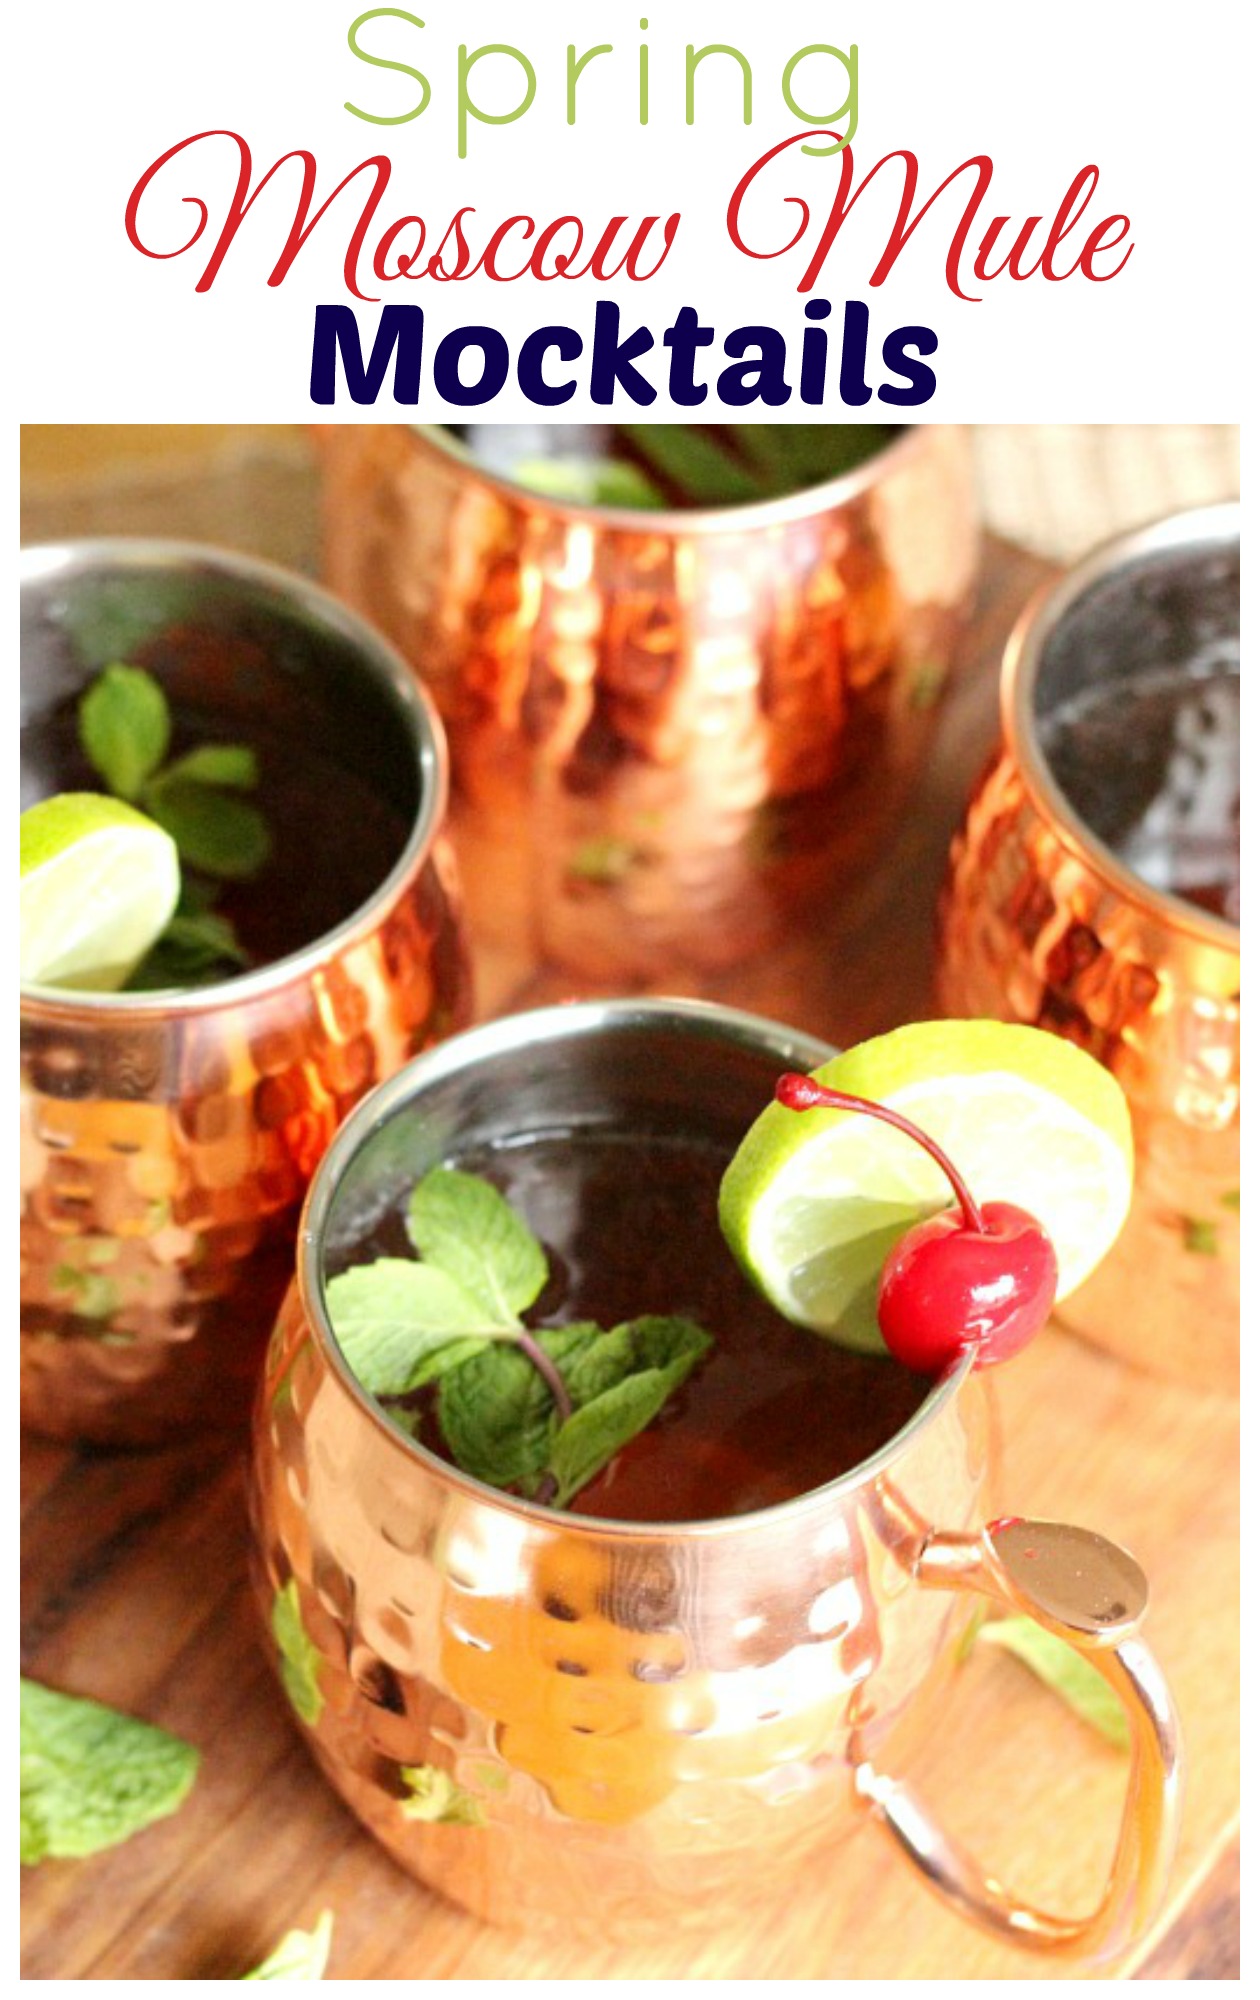 Strawberry Mint Moscow Mules The Secret Ingredient Is Strawberry